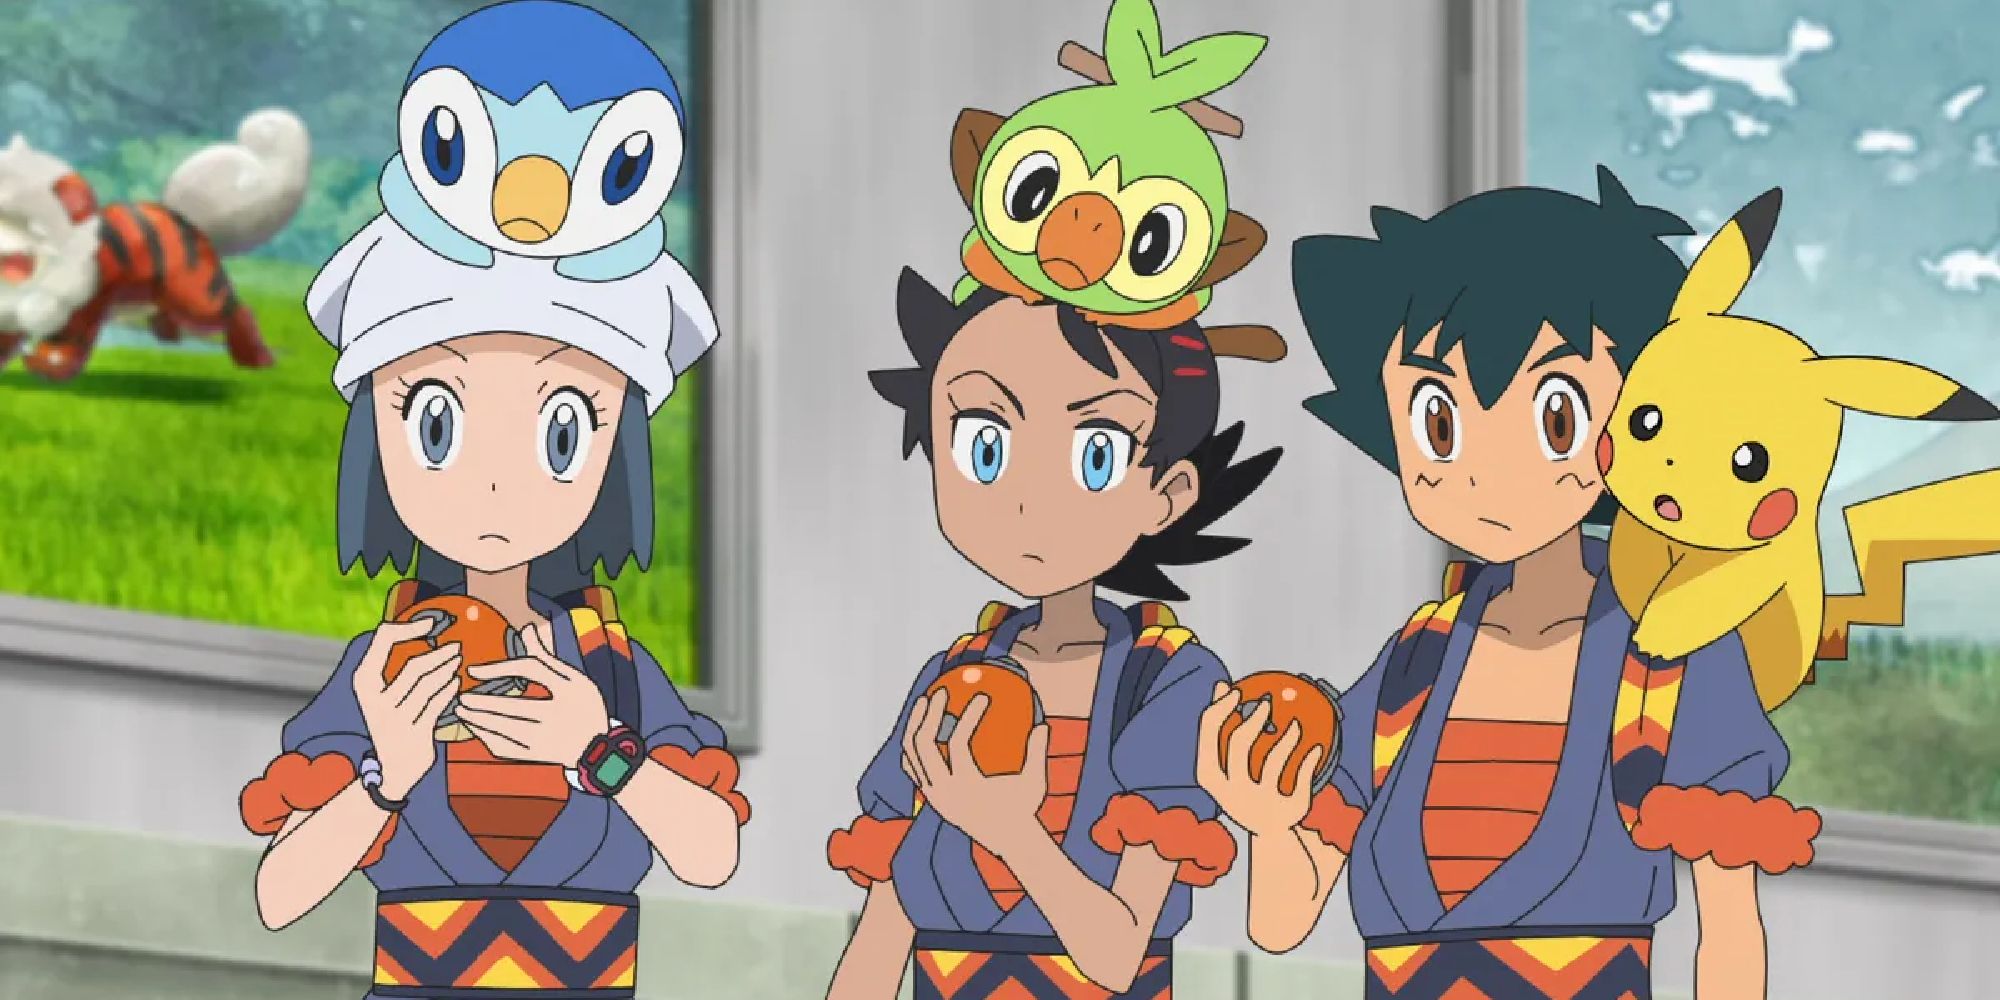 Dawn, Goh, and Ash wearing Hisuian garb holding Poke Balls with Piplup, Grookey, and Pikachu